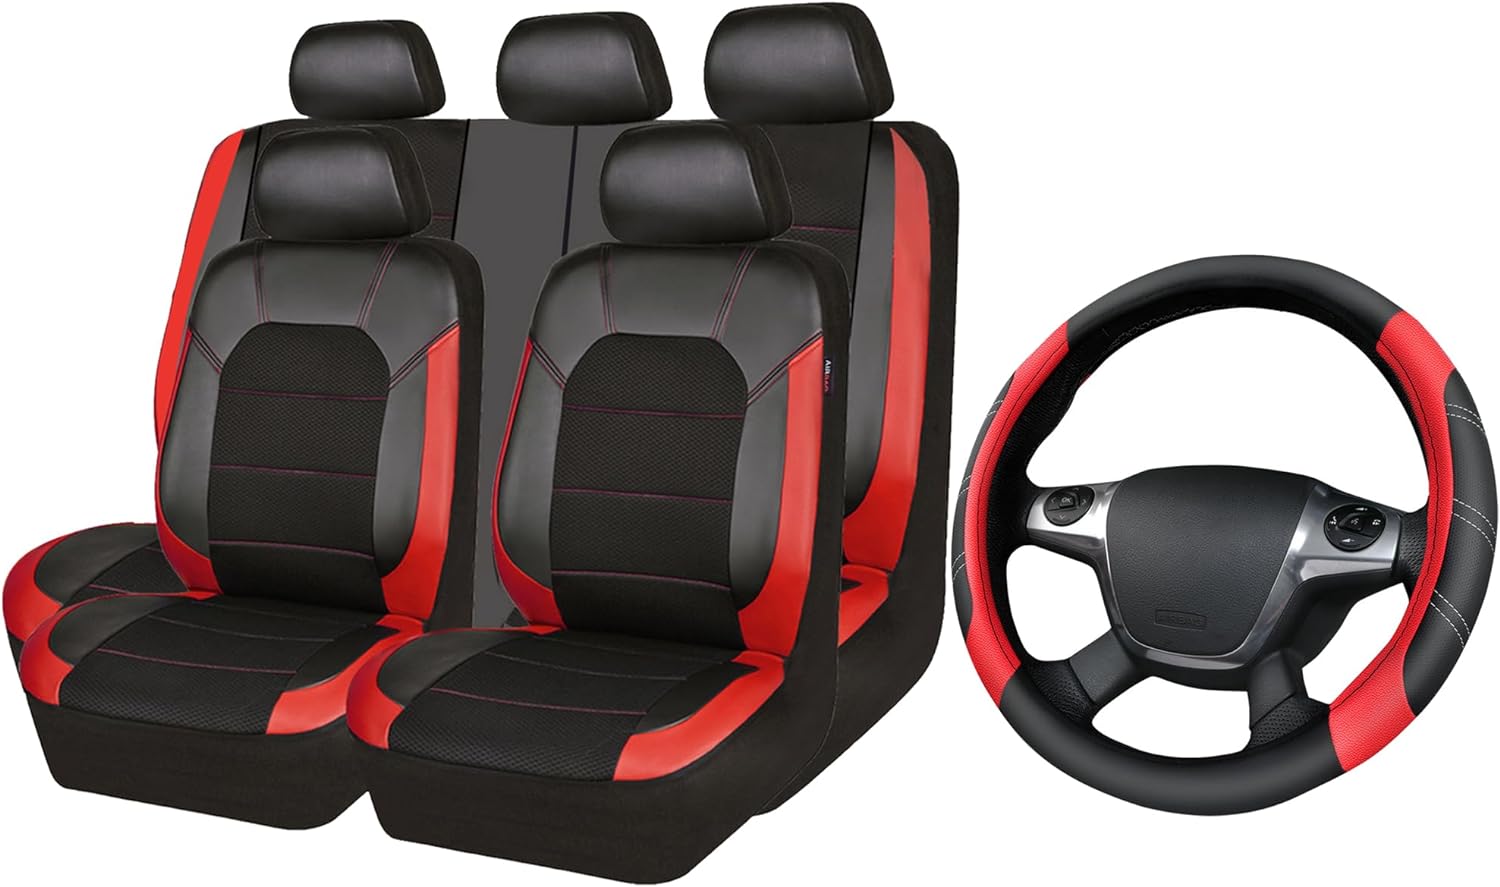 CAR PASS Universal Leather car seat Covers, Line Rider Microfiber Leather Sporty Steering Wheel Cover 14.5-15inch Universal Fits for 95% Truck,SUV,Cars (Black and Red)